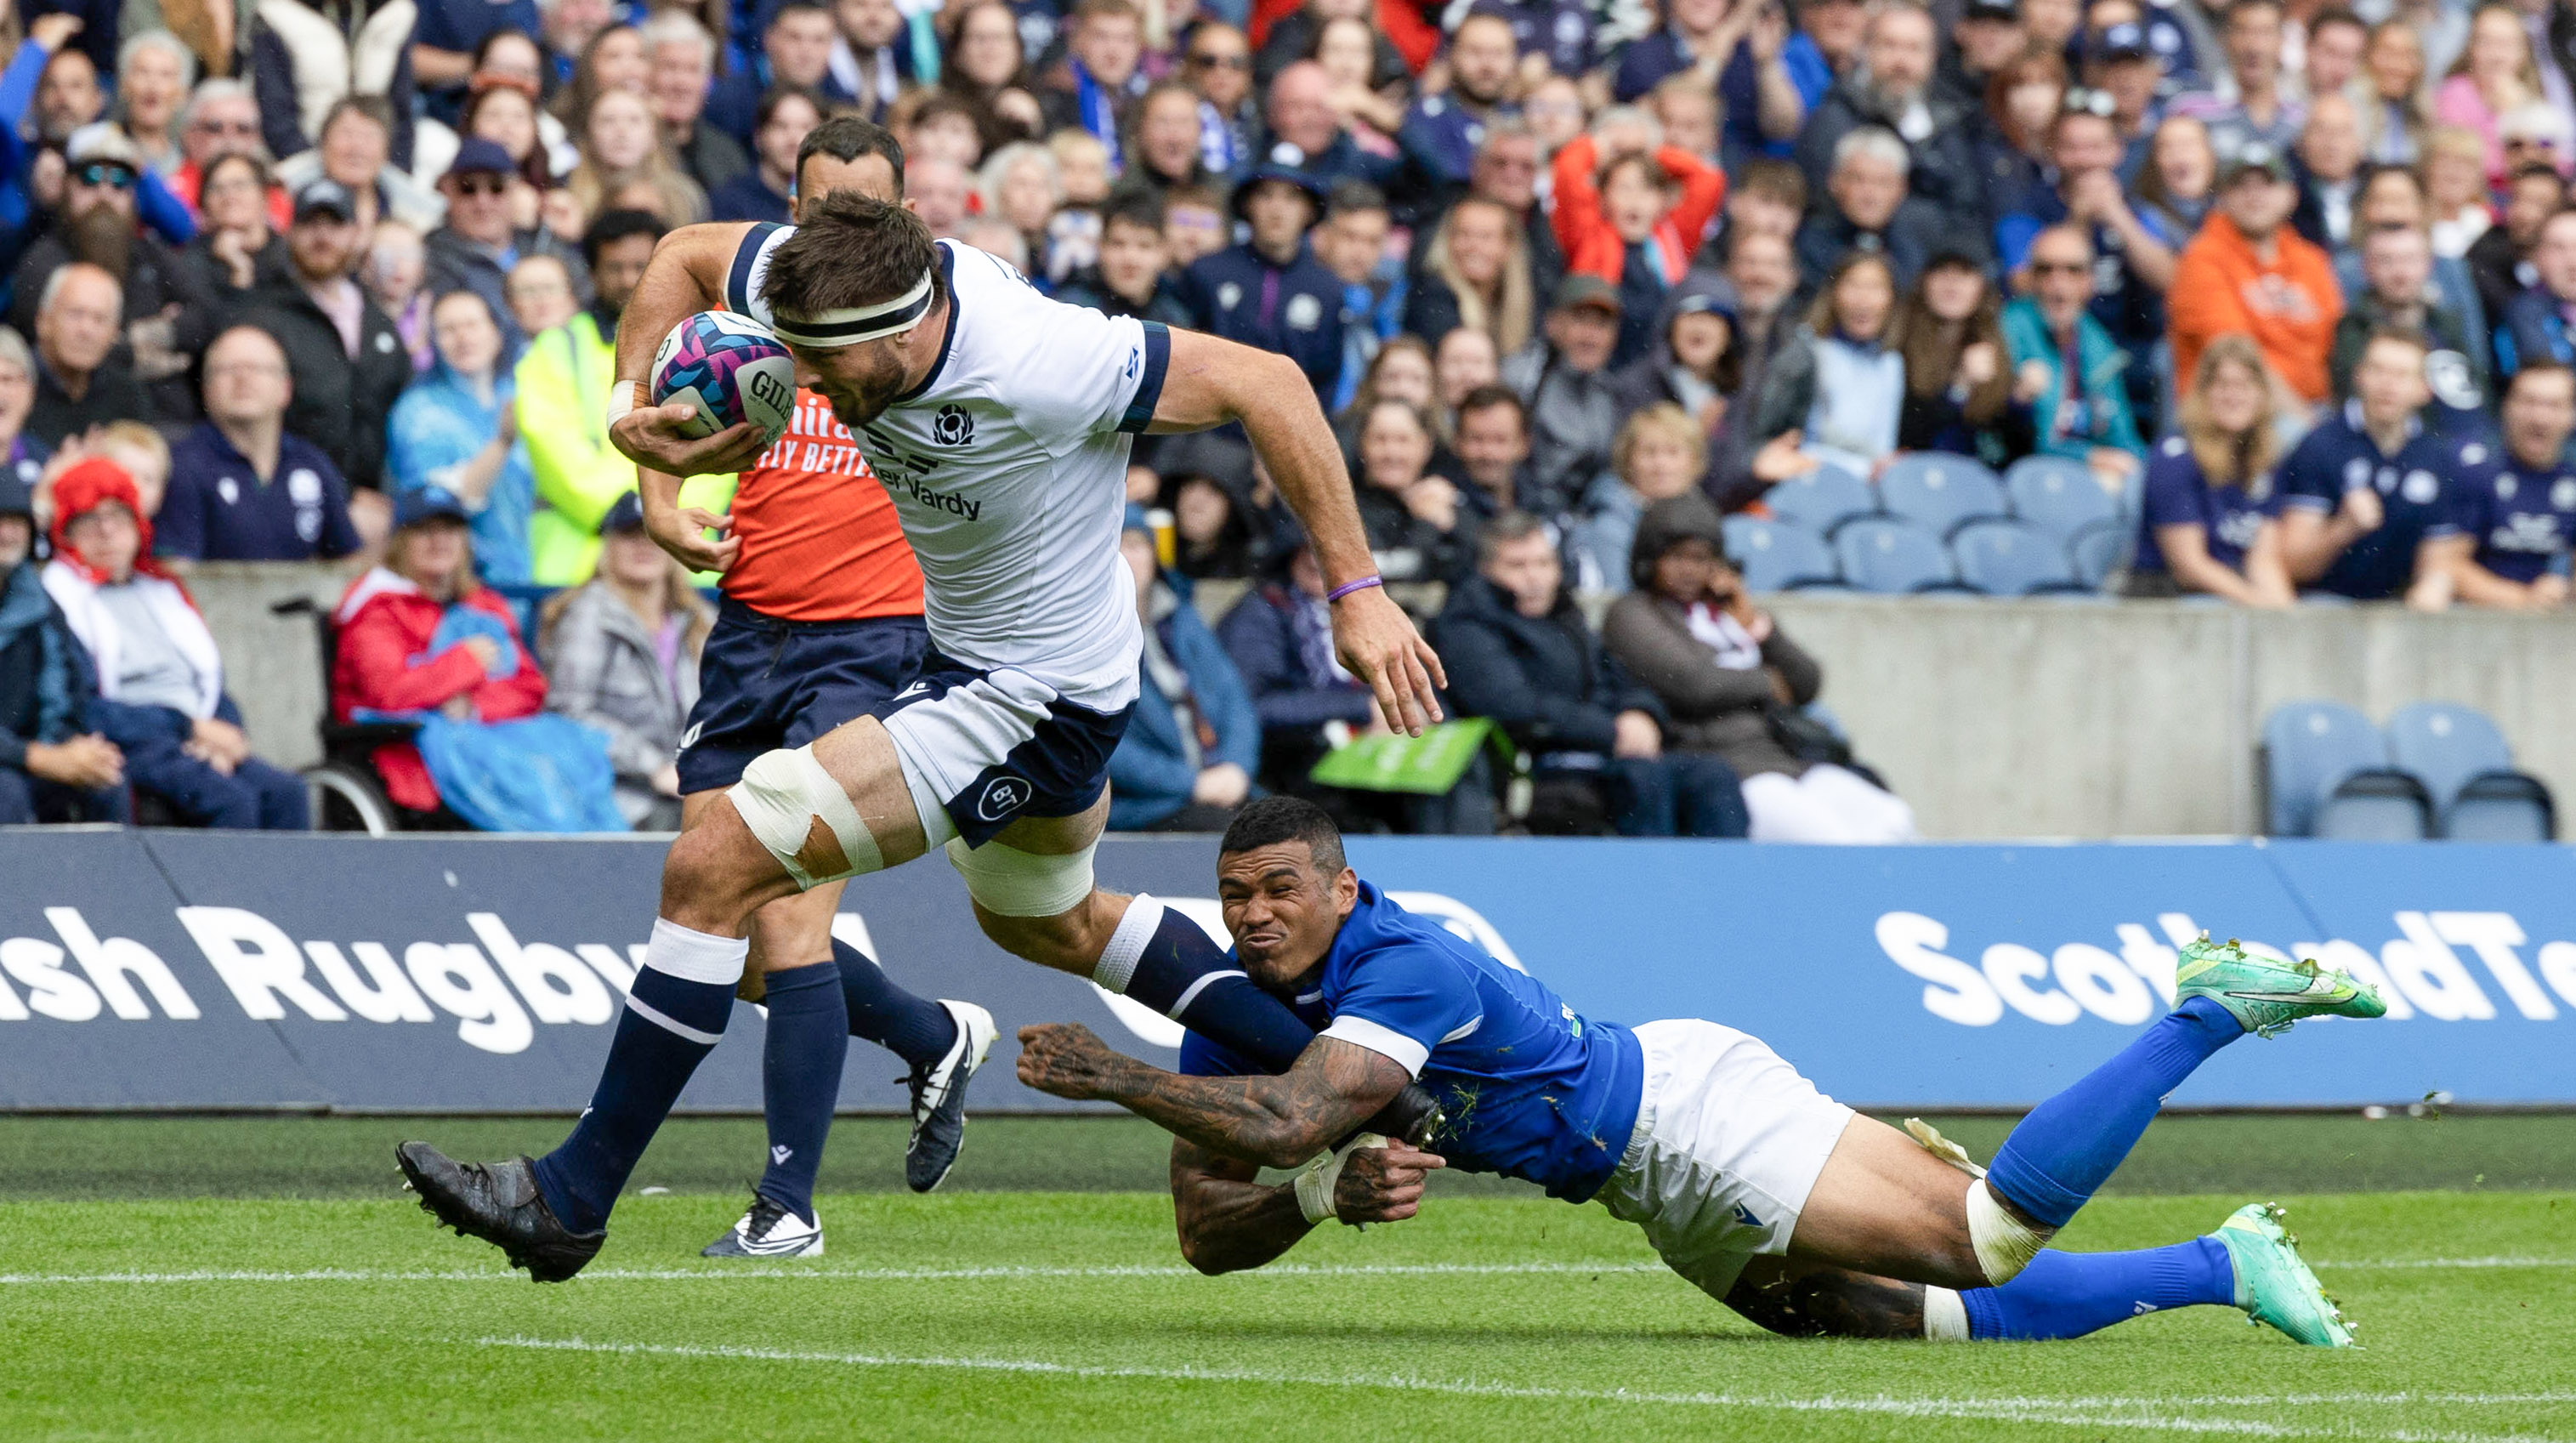 Scotland beat Italy 25-13 at Murrayfield - Live